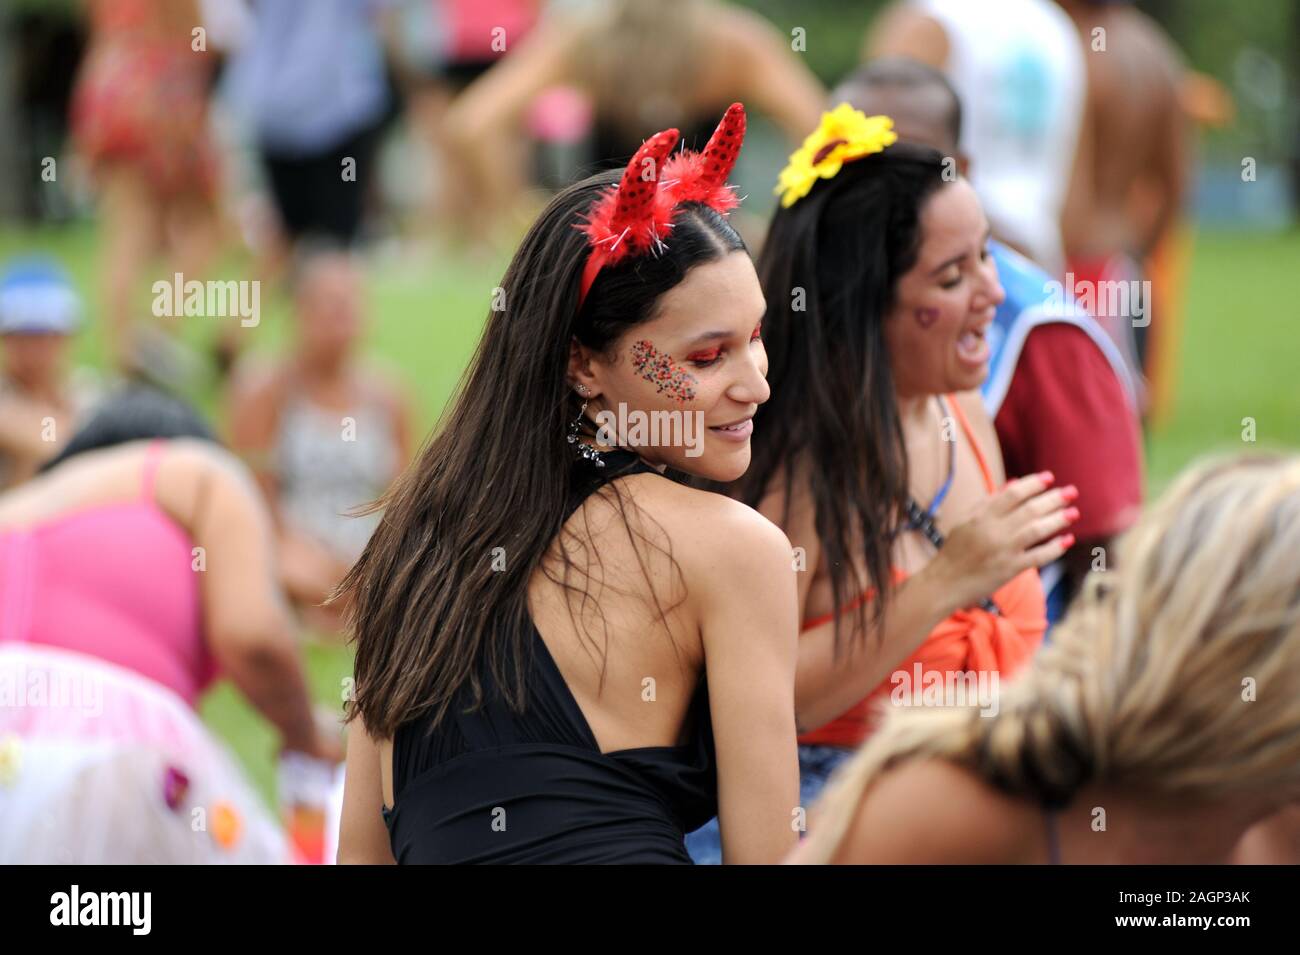 South America, Brazil - March 3, 2019: Disguised reveler enjoys herself during a carnival street parade in Rio de Janeiro. Stock Photo